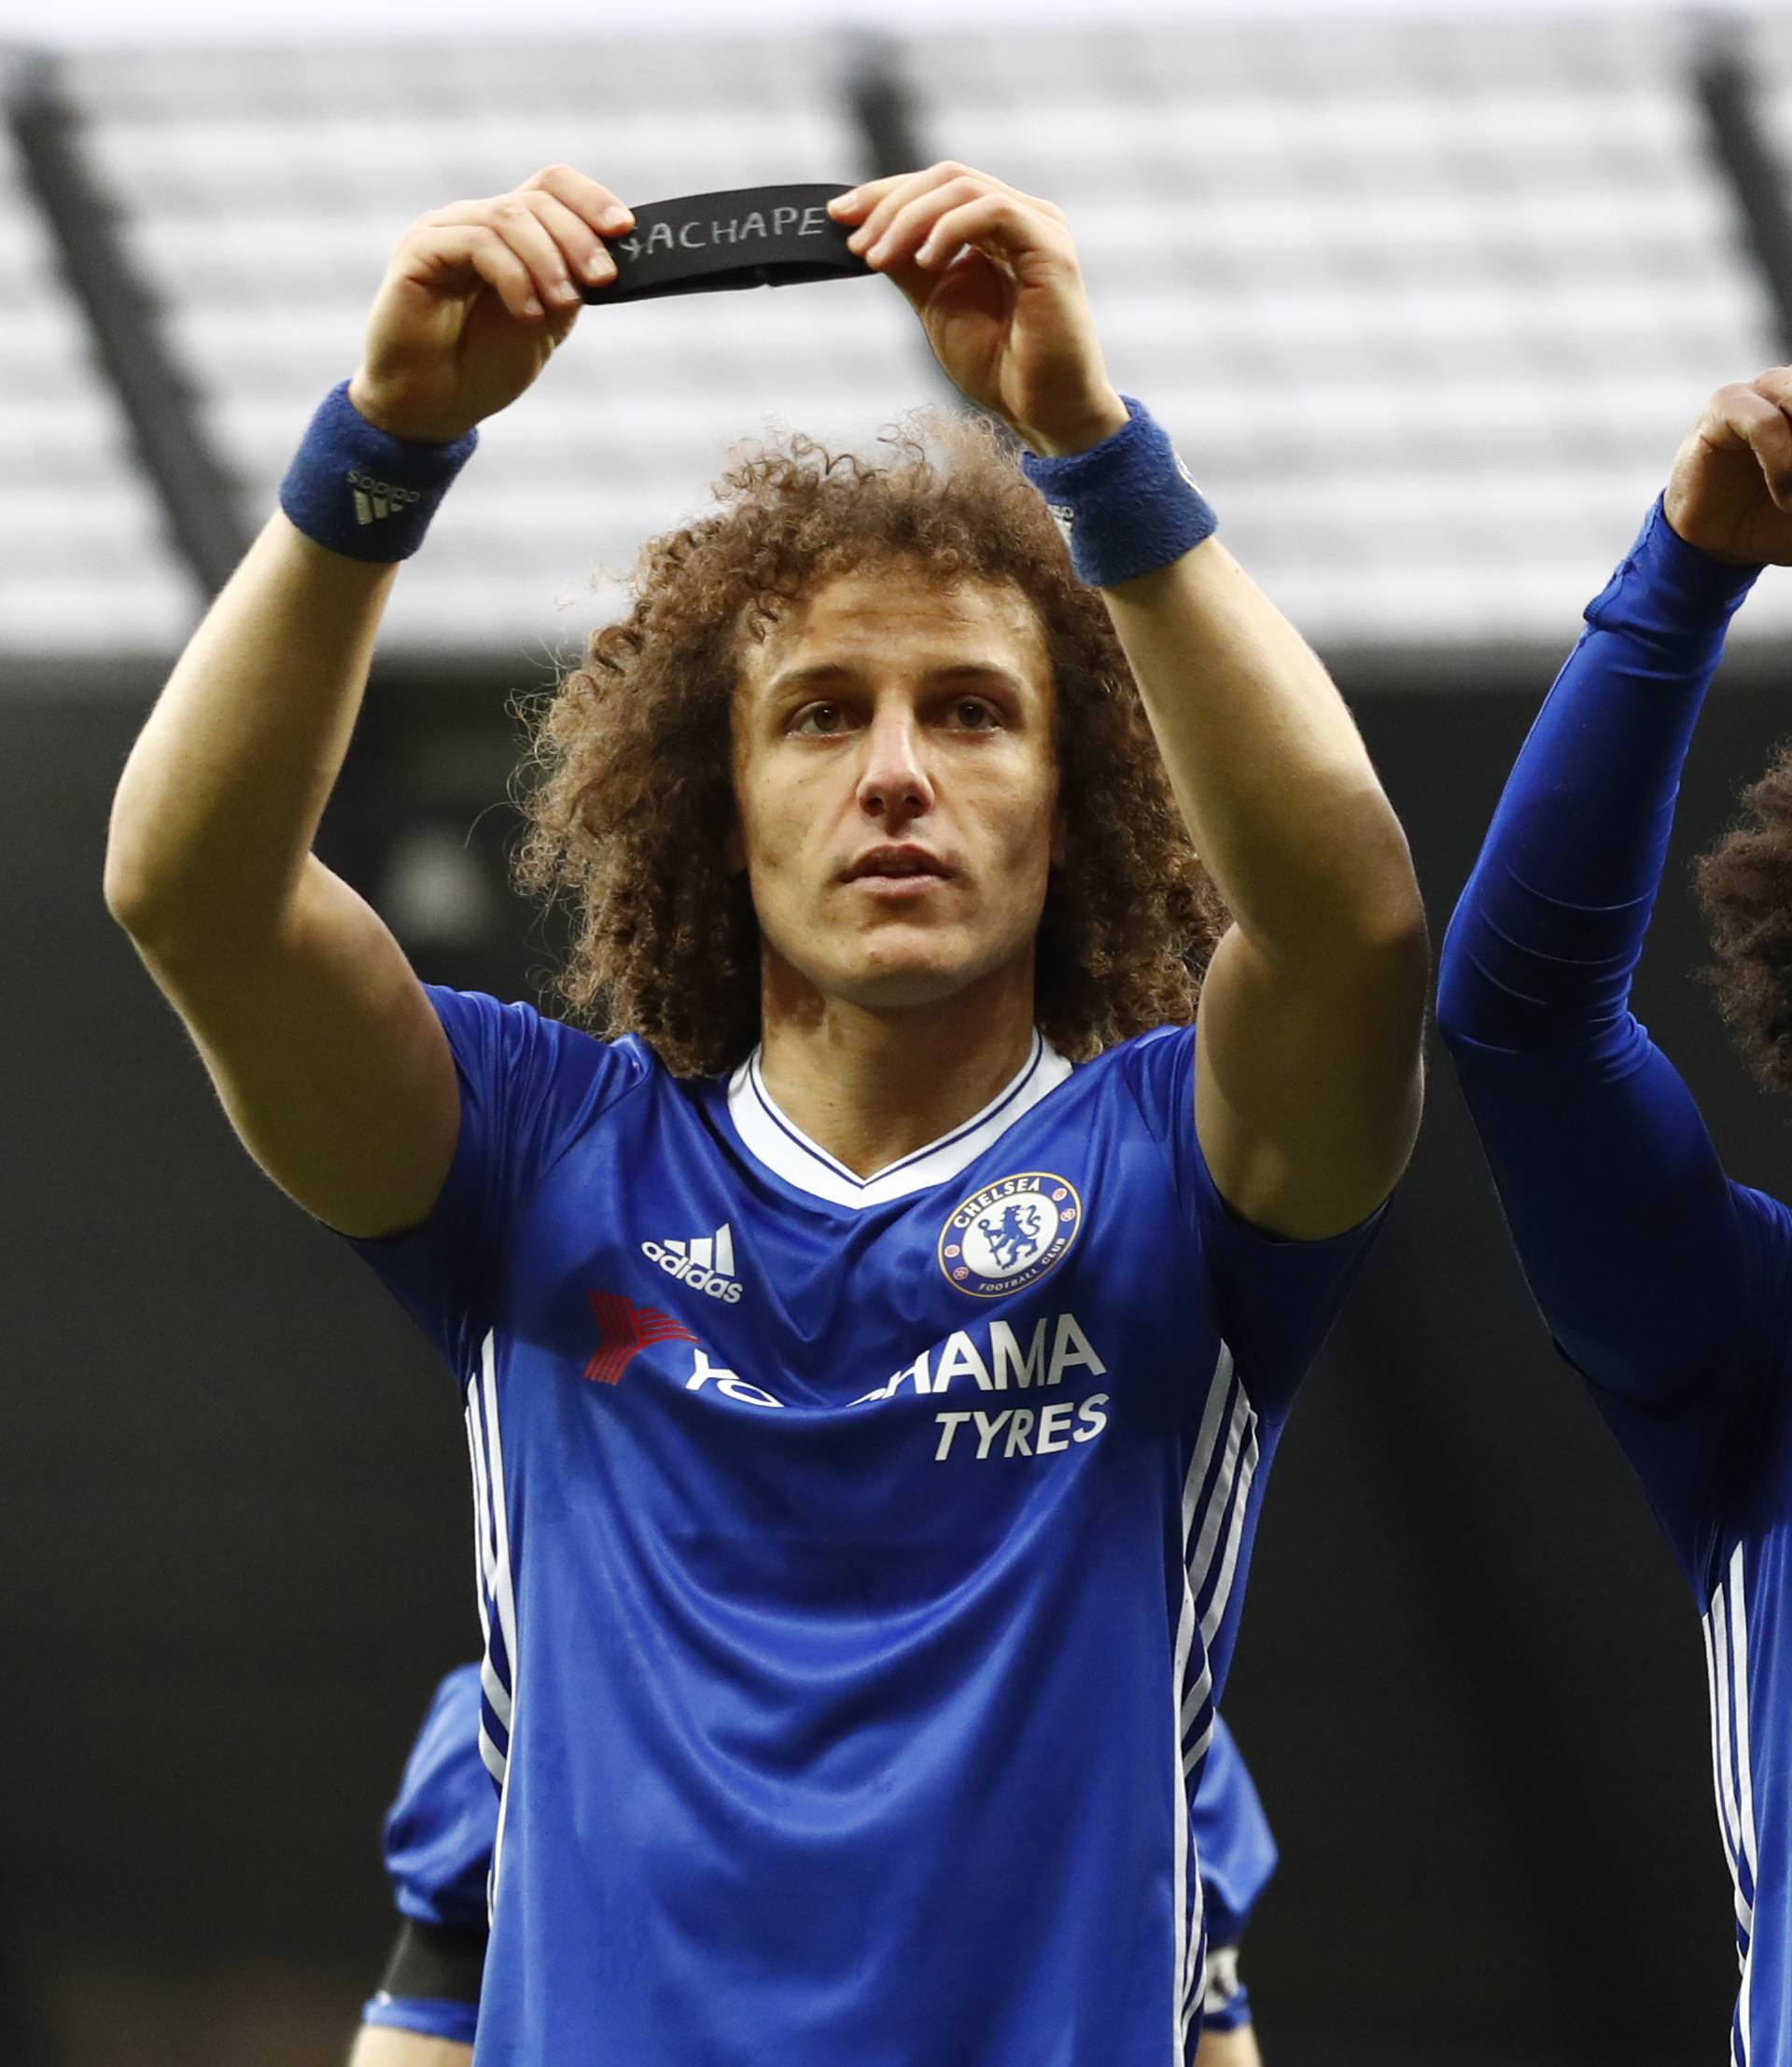 Chelsea's Willian celebrates scoring their second goal with David Luiz as they hold armbands in respect for the victims of the Colombia plane crash containing the Chapecoense players and staff